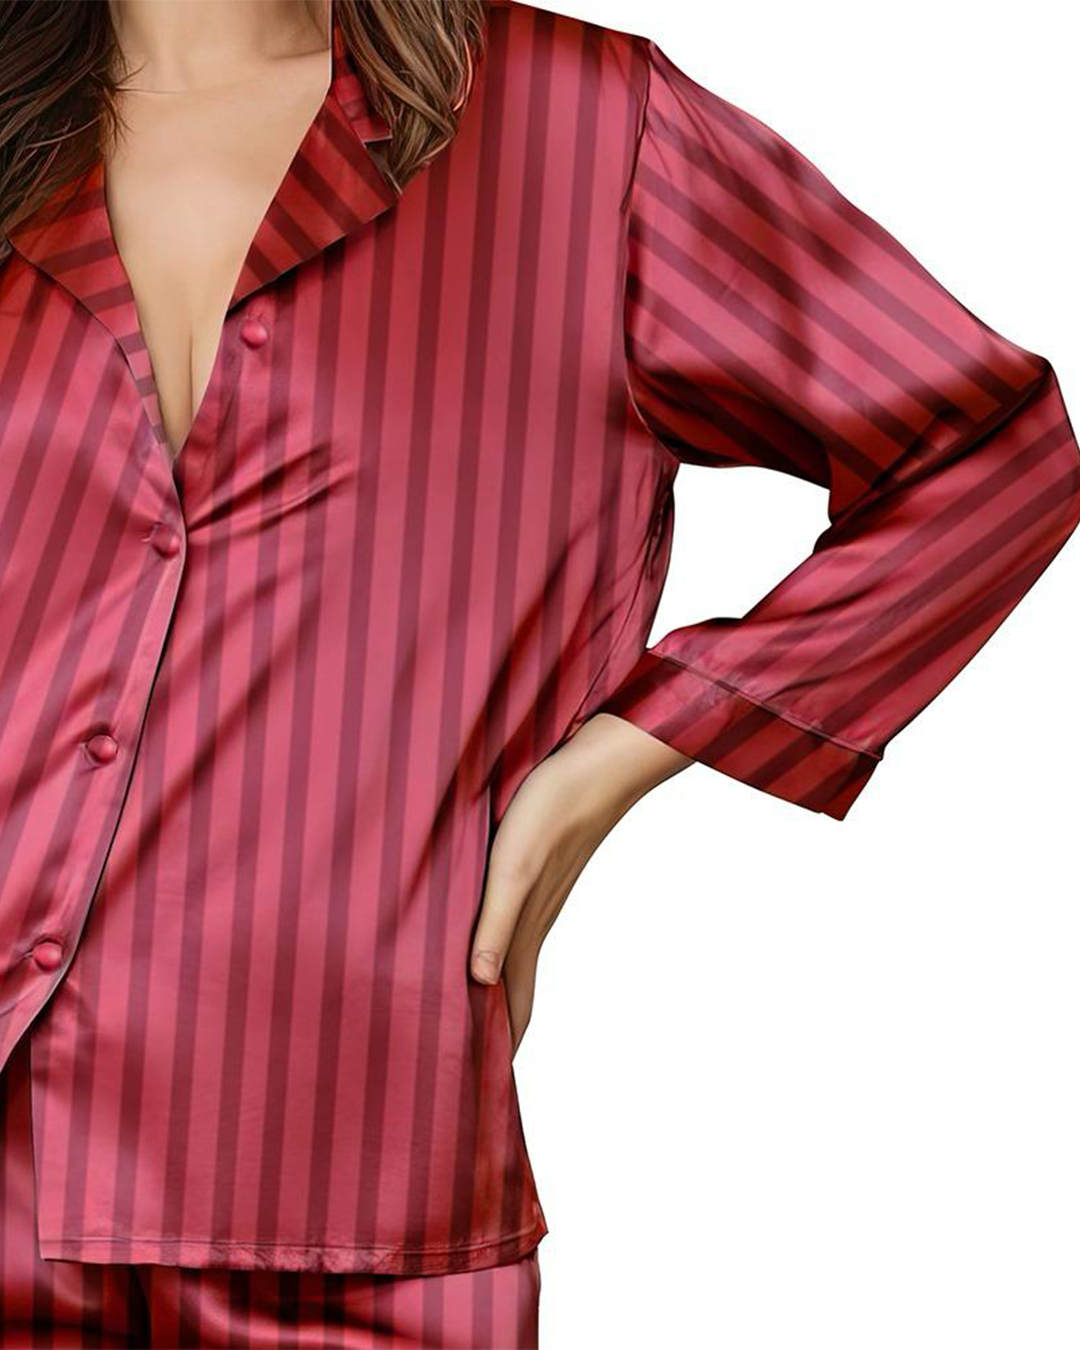 Women's pajamas with striped satin buttons